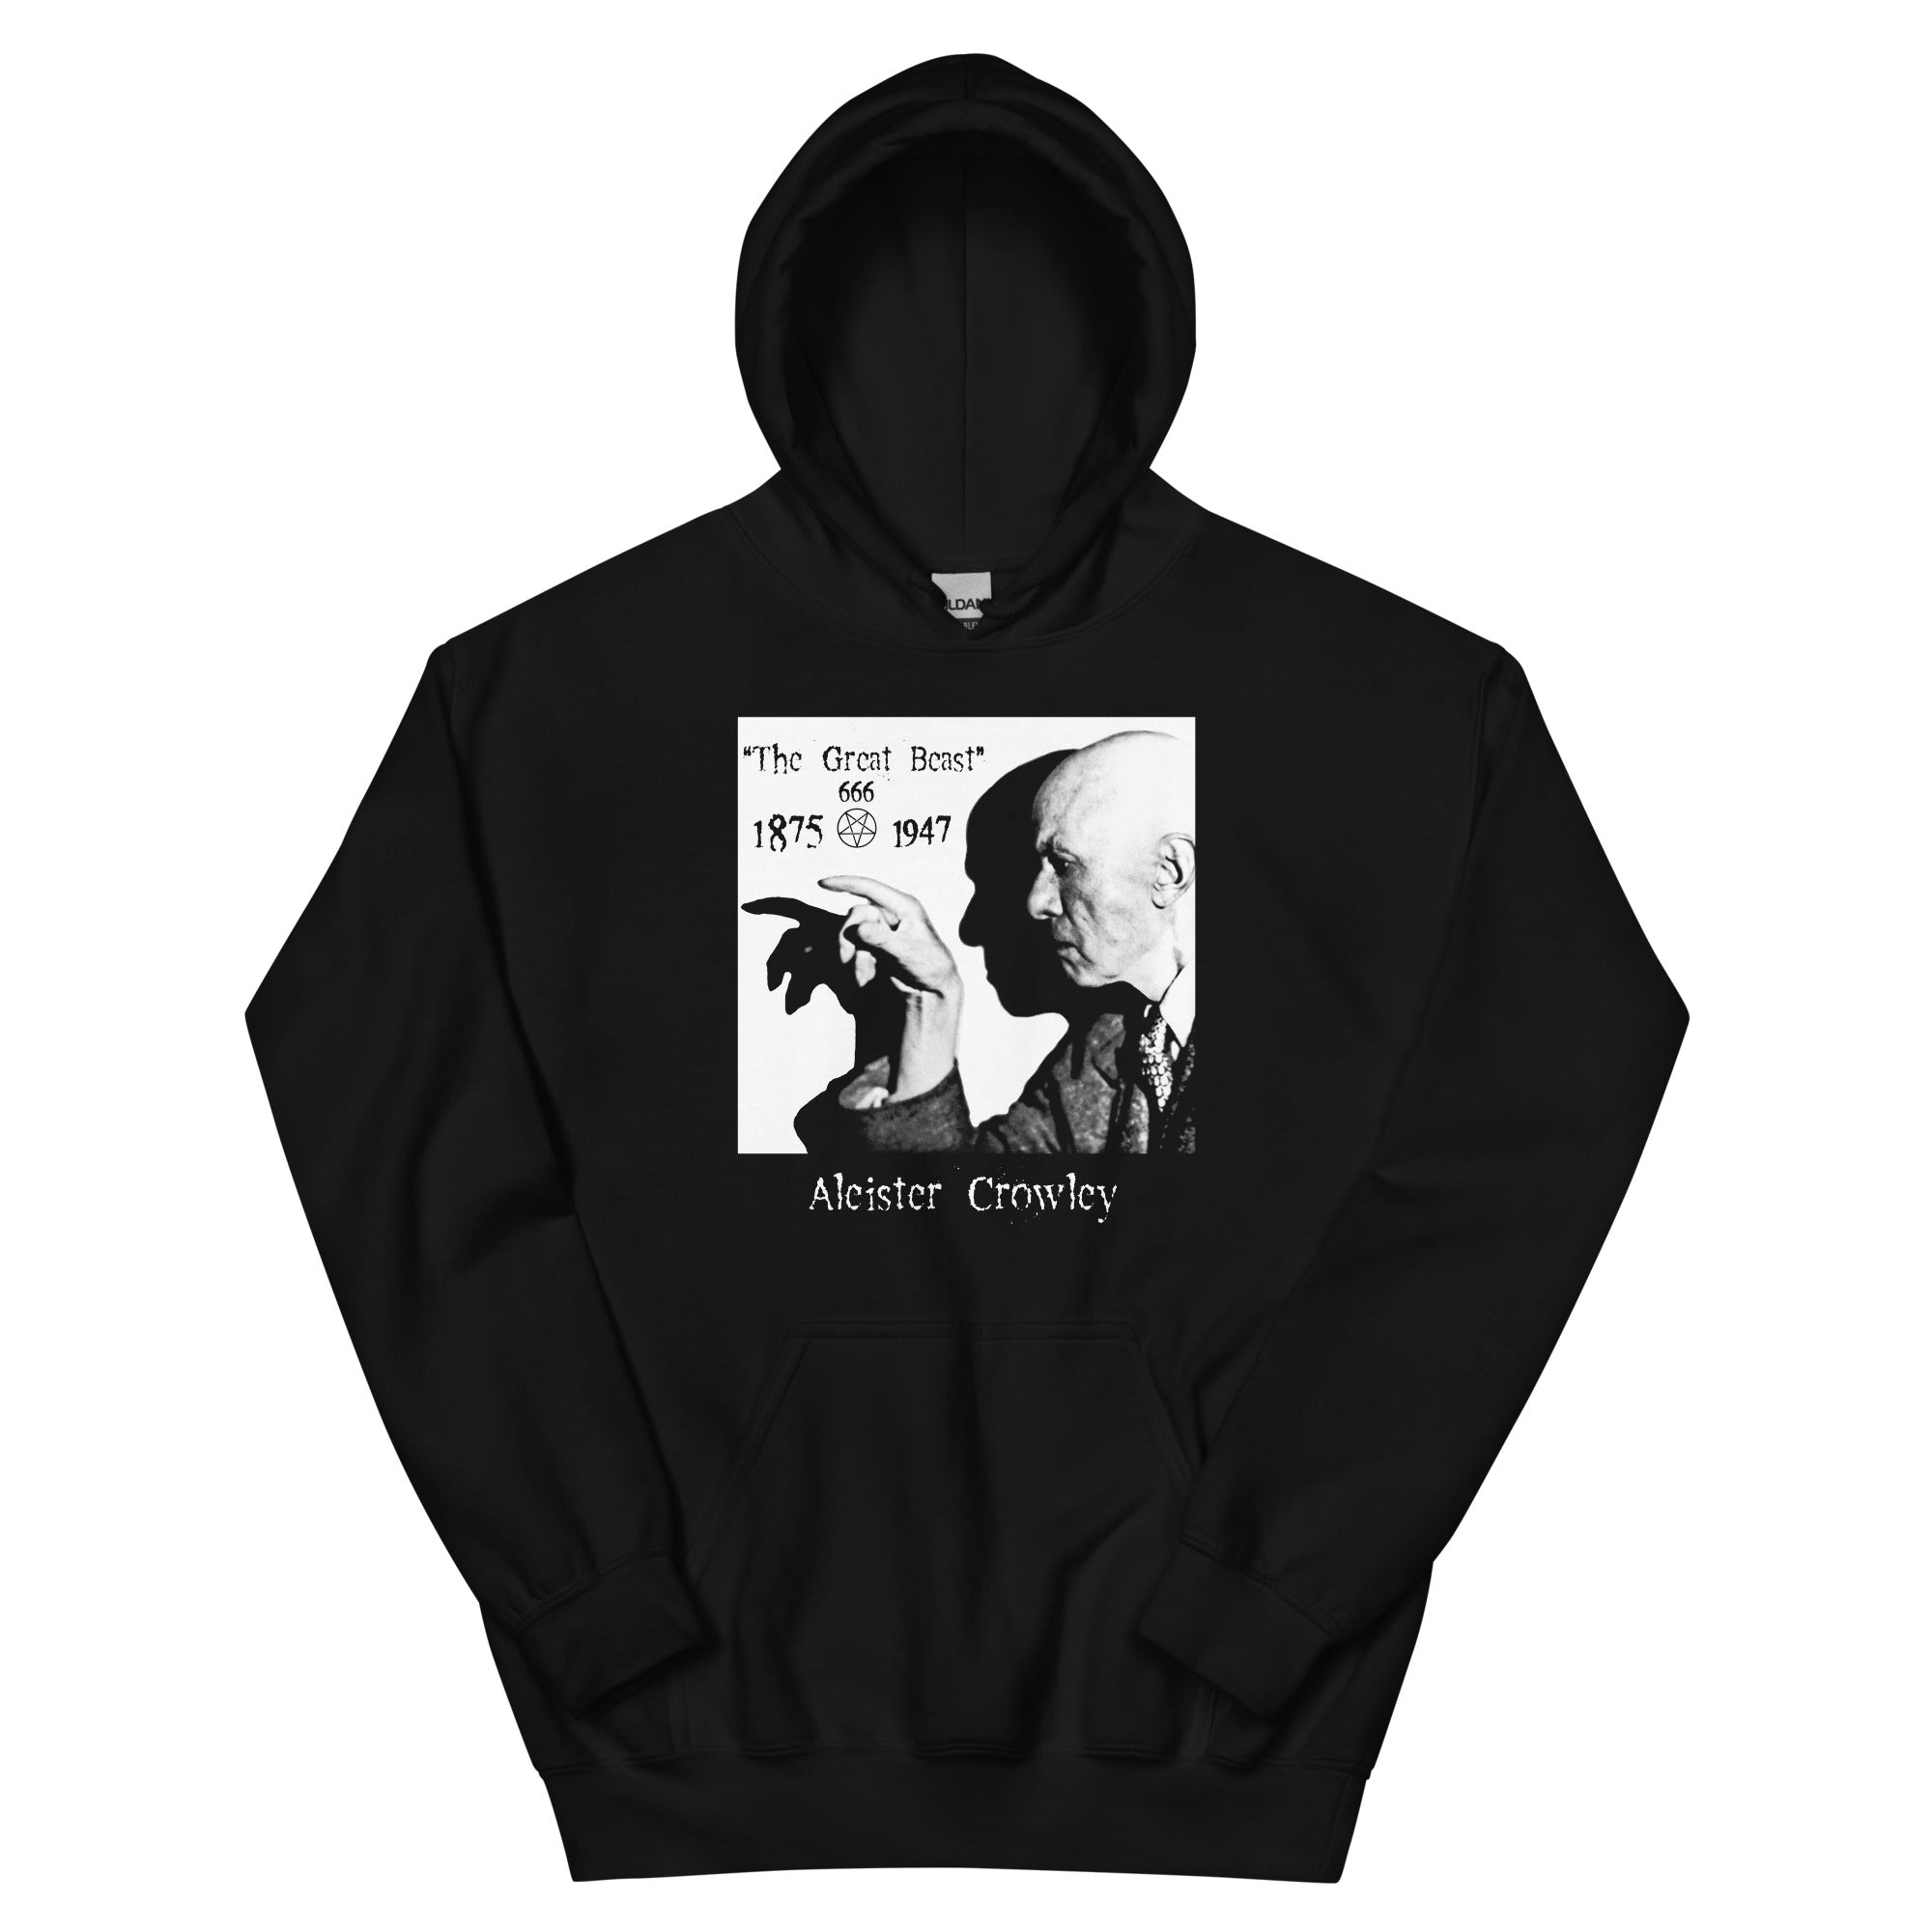 Aleister Crowley Infamous Occult Leader of Thelema Sex Magic Black Hoodie - Edge of Life Designs